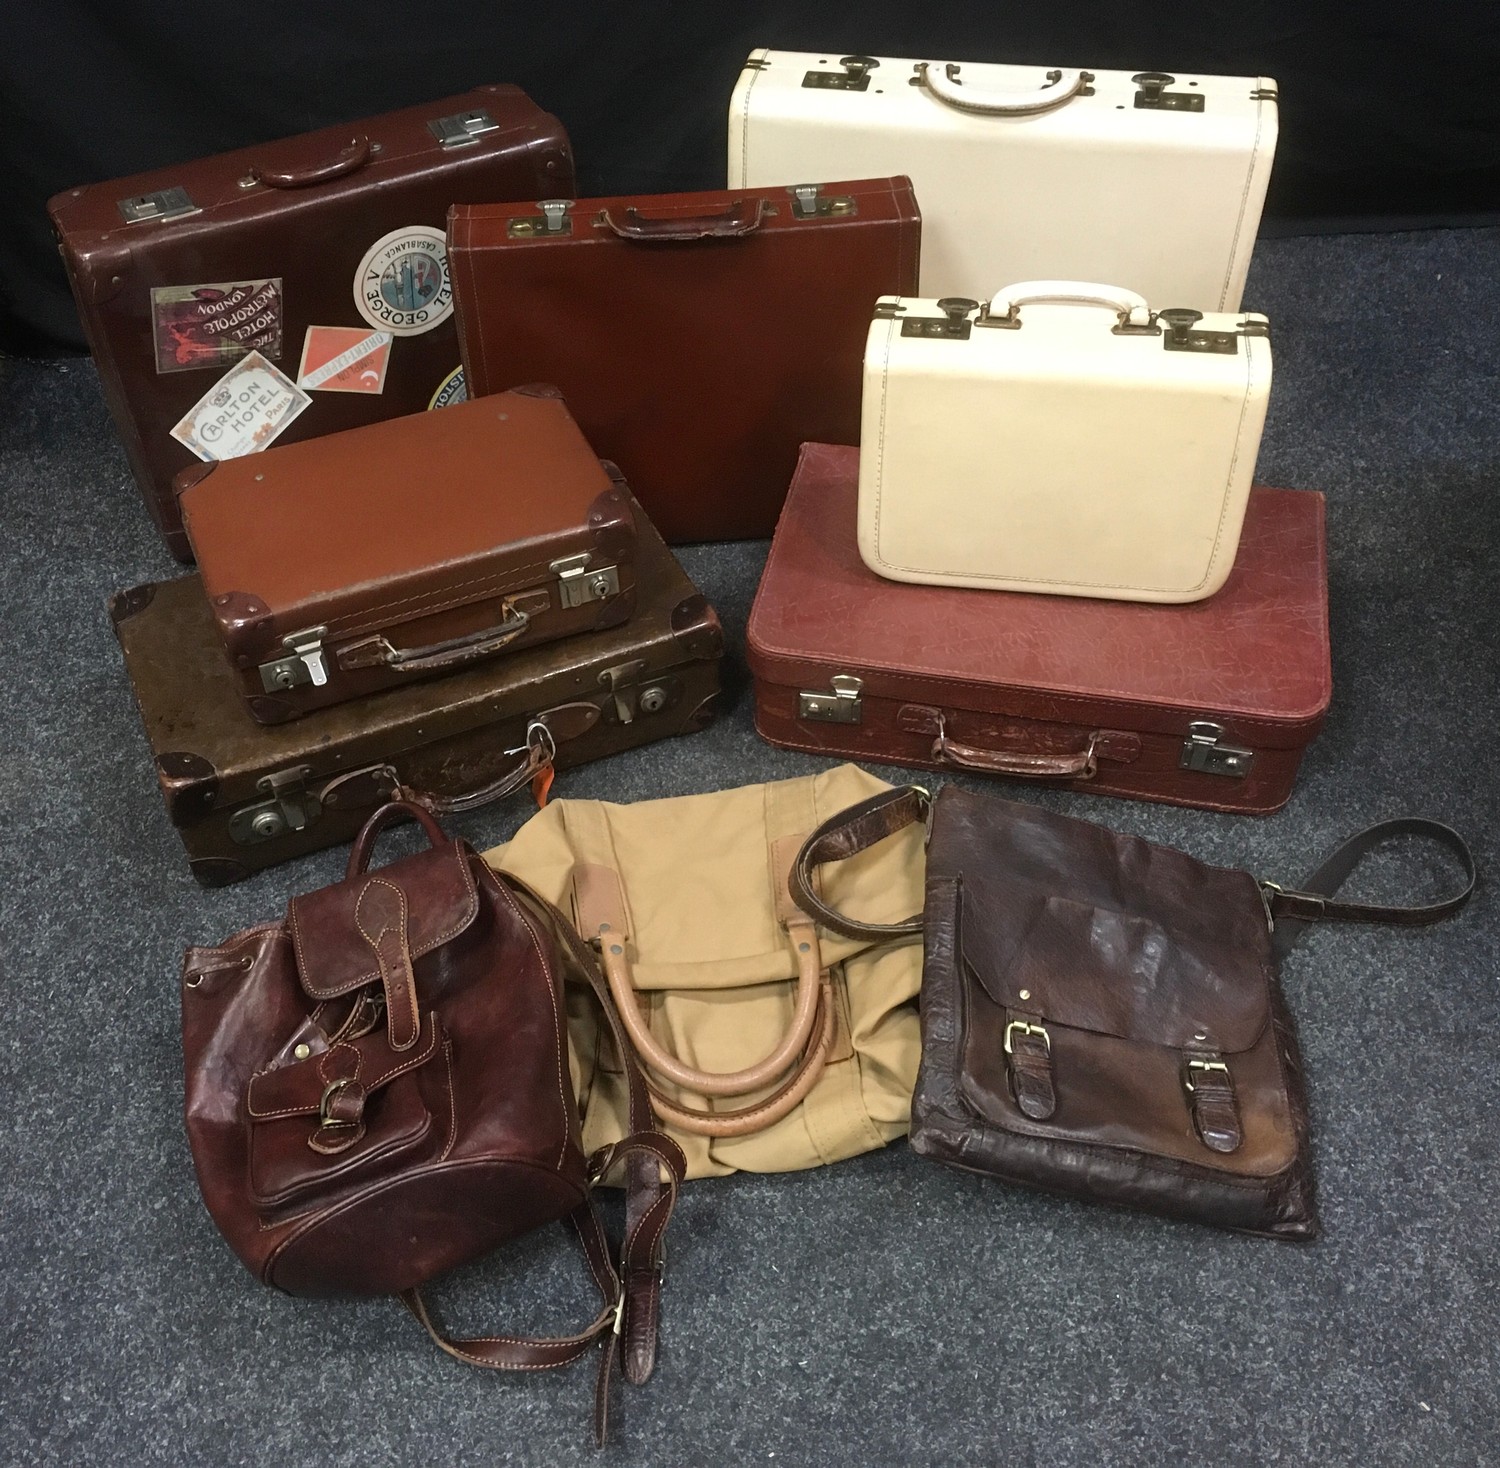 Vintage luggage - a leatherette overnight suitcase with matching vanity case; a leather briefcase;